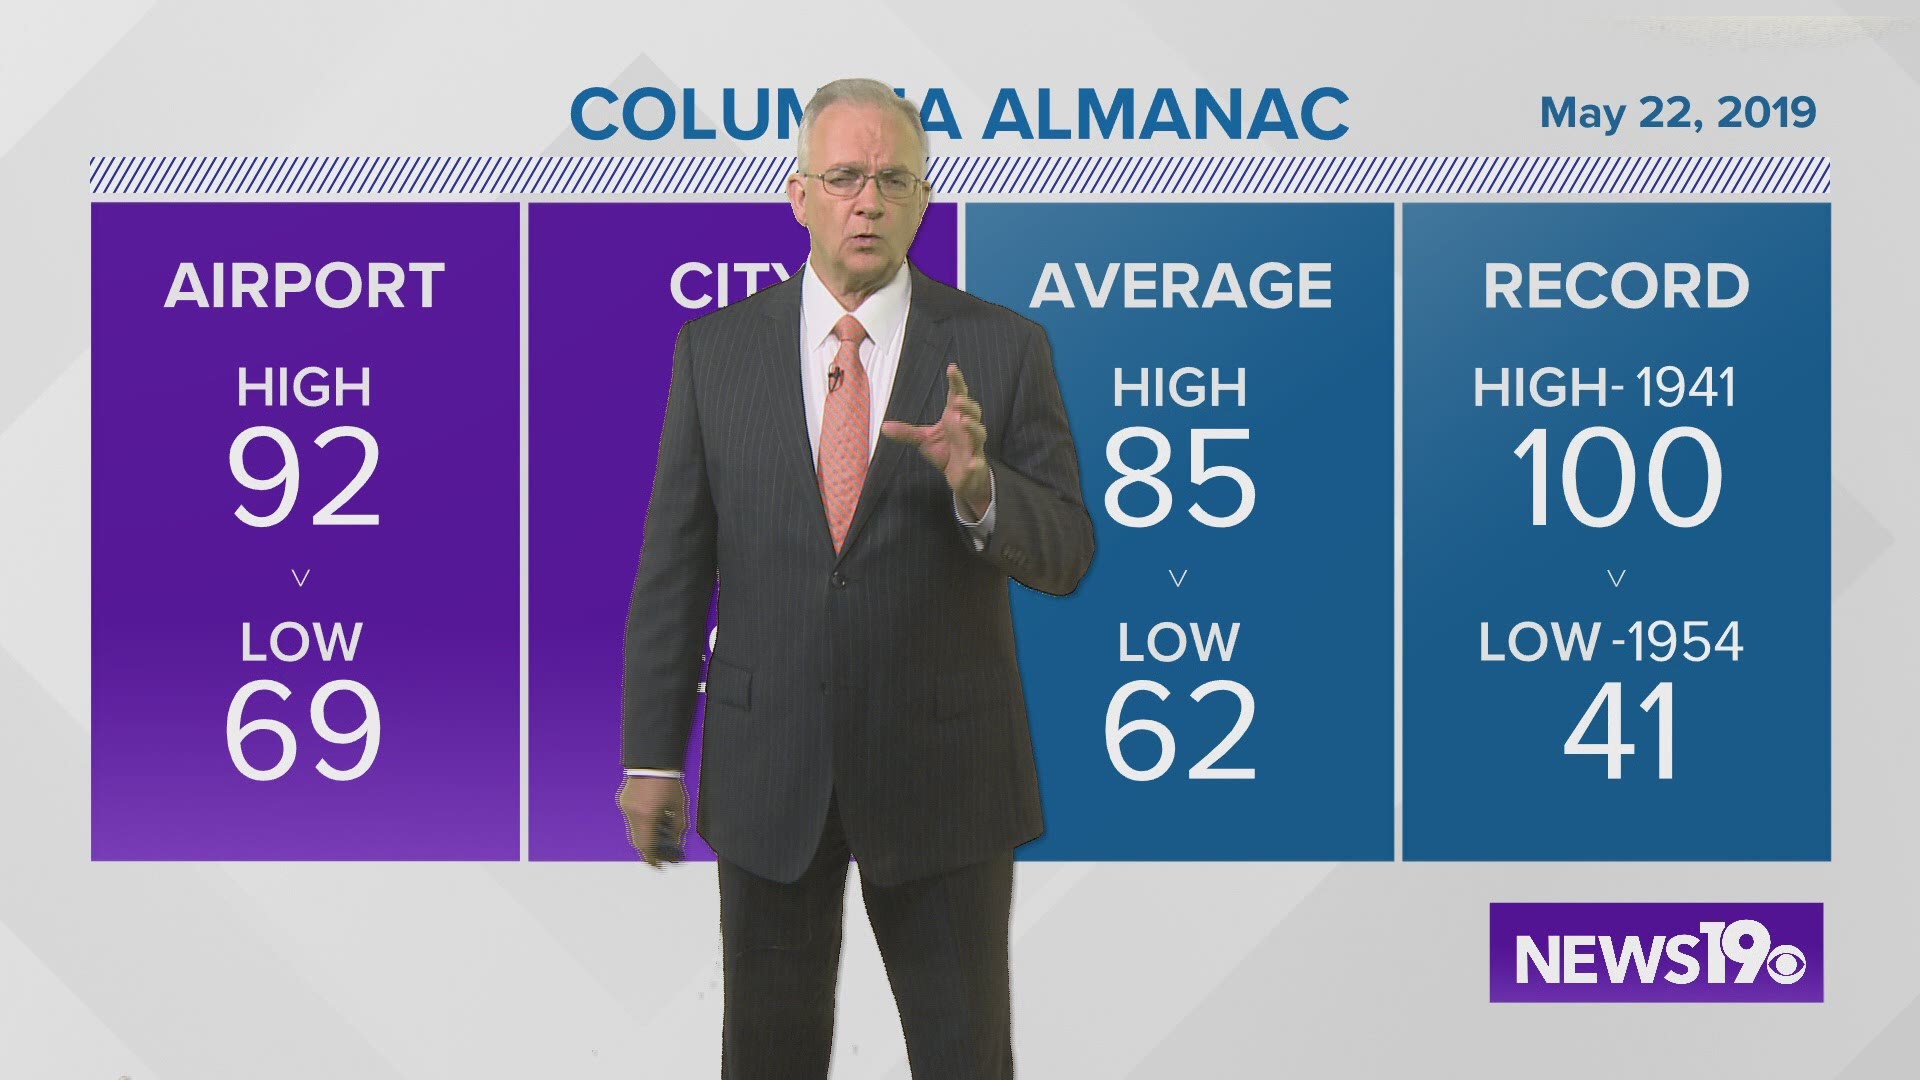 Jim Gandy's evening forecast for Wednesday, May 22, 2019.